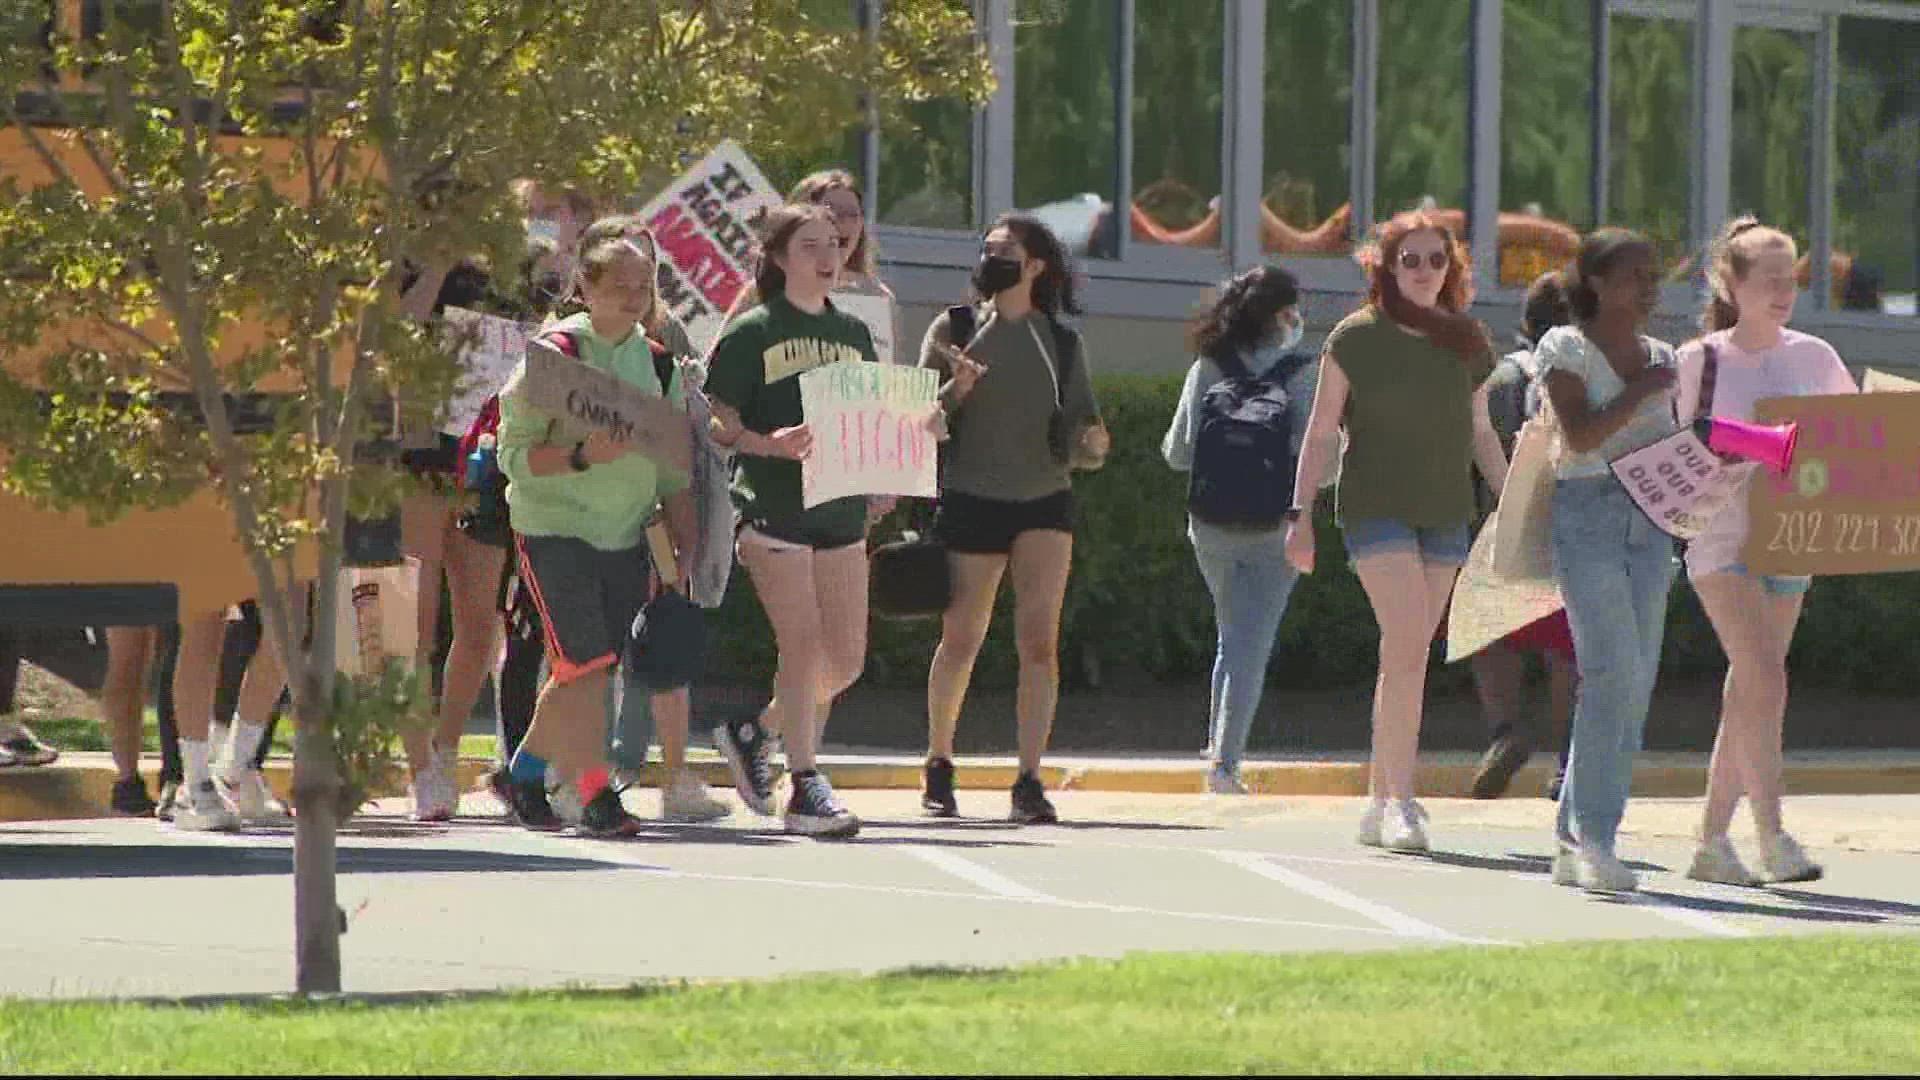 Students from 45 different schools across Virginia walkout in support of abortion access.